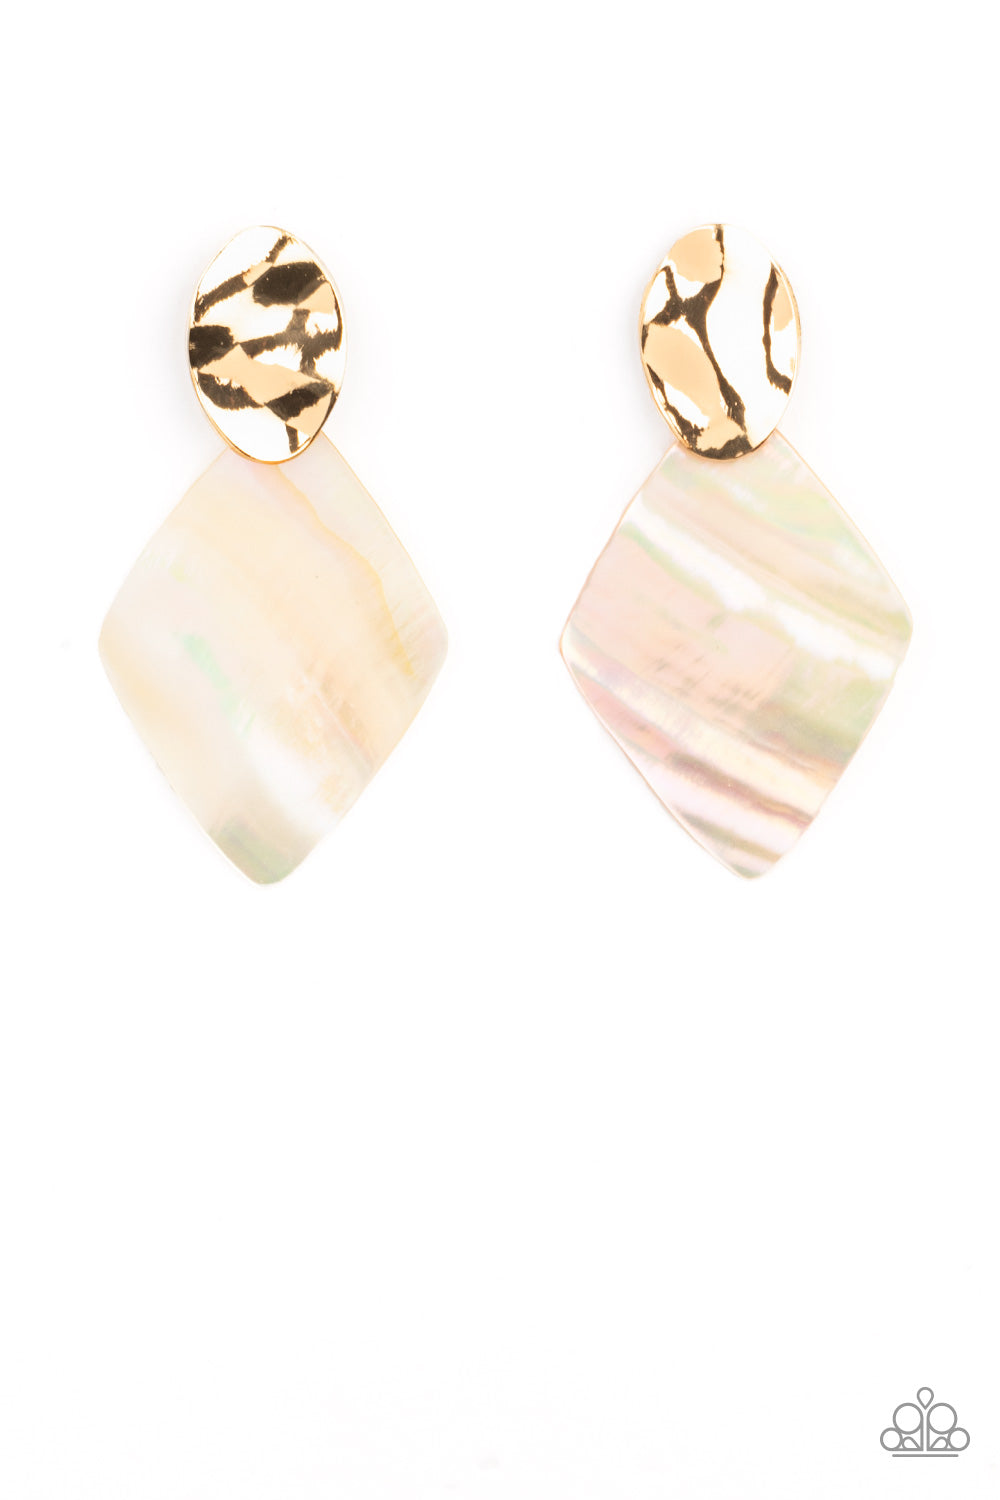 Alluringly Lustrous - Gold - Iridescent Shell-Like Earrings - Paparazzi Accessories - An iridescent shell-like frame attaches to the bottom of a hammered shiny gold oval, creating a refined centerpiece. Earring attaches to a standard post fitting. Sold as one pair of post earrings.